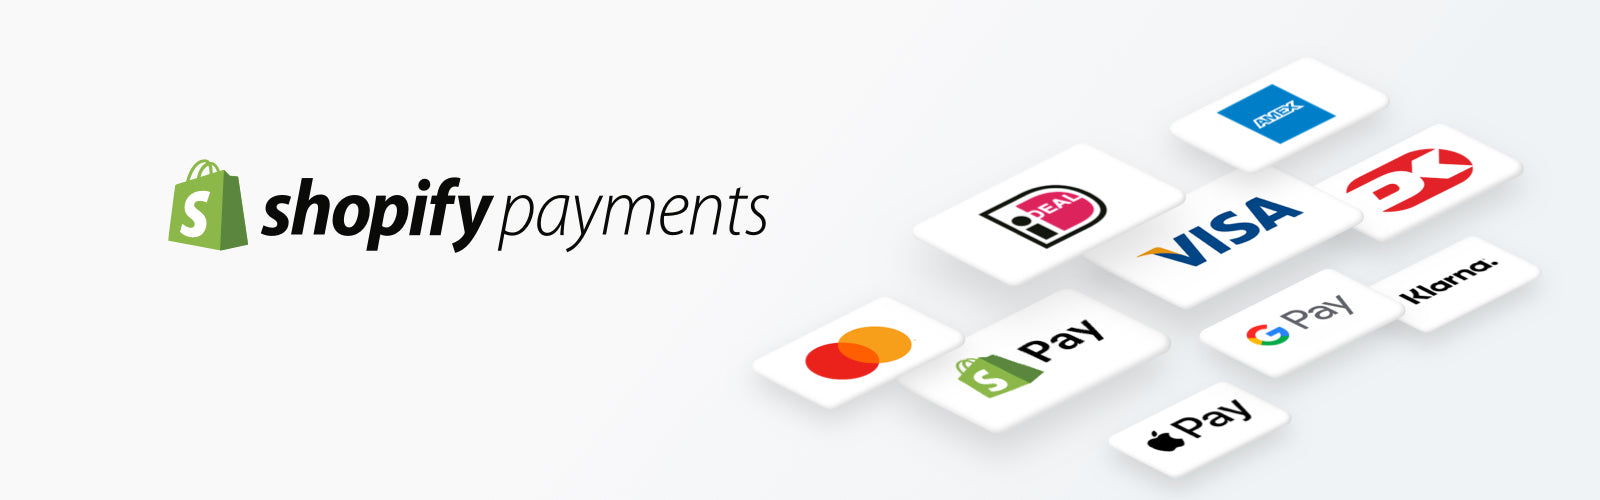 Shopify Payments 扩展至新地区